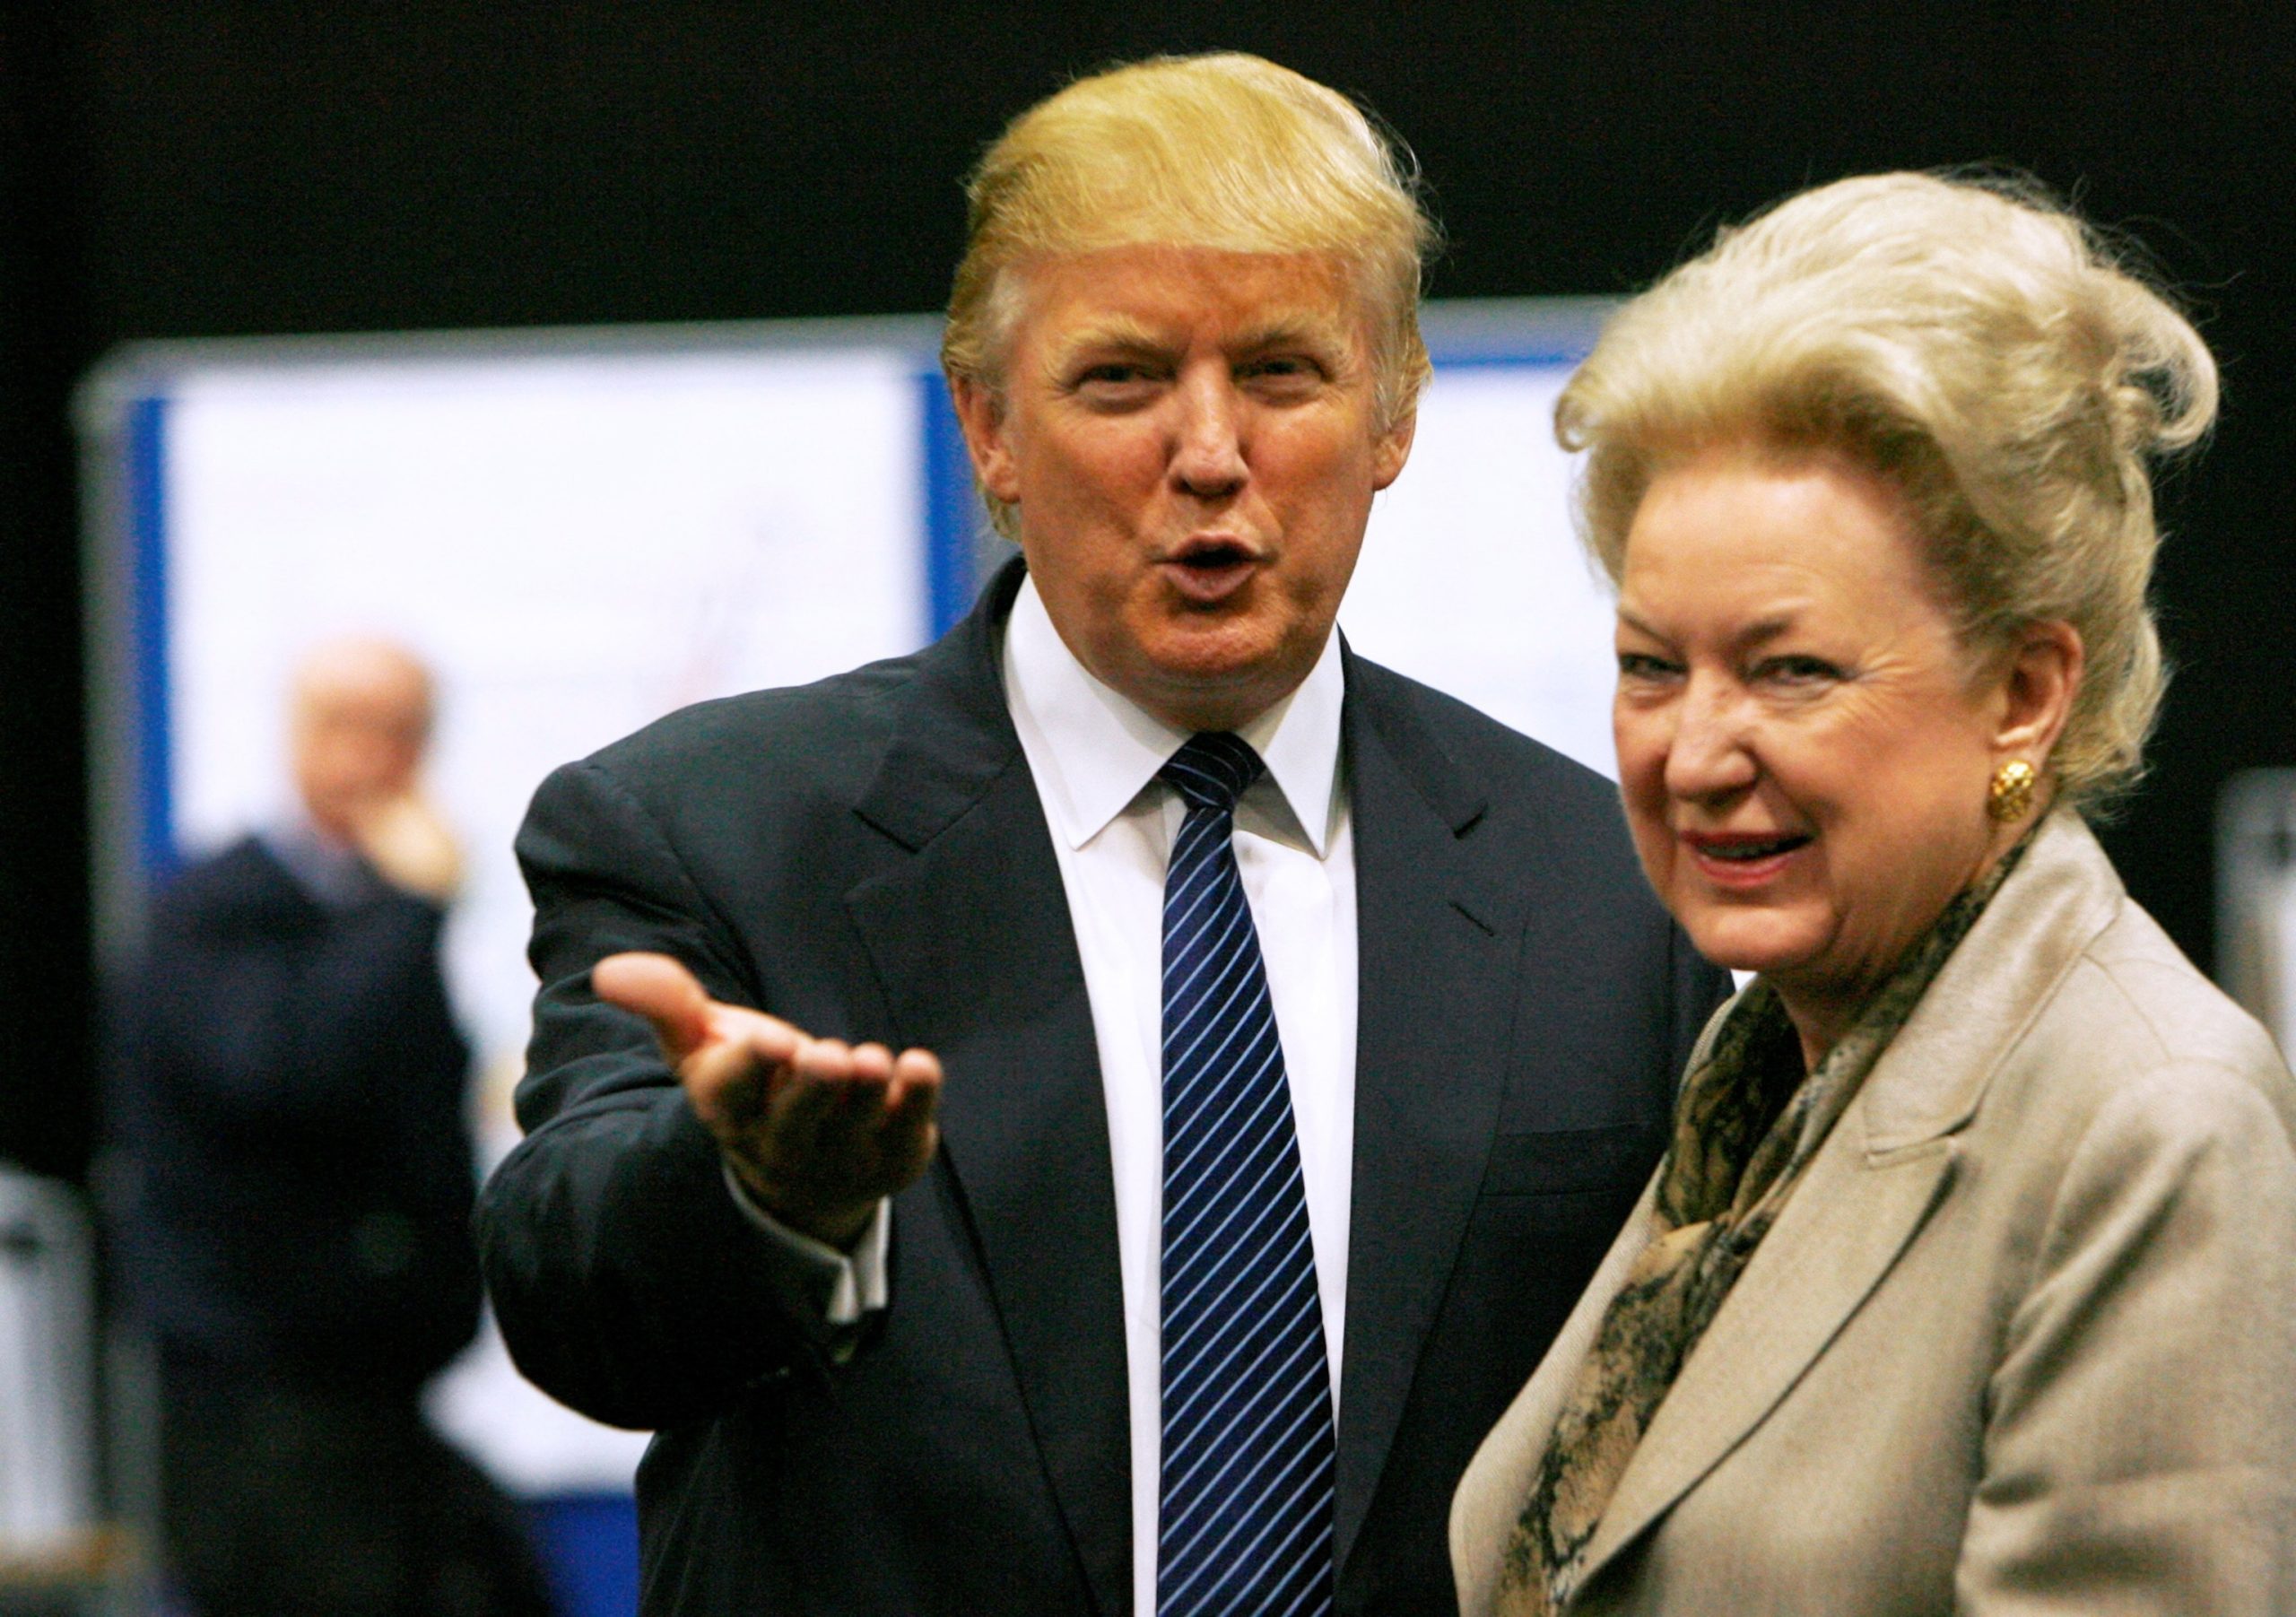 Sources report the passing of Maryanne Trump Barry, Donald Trump's older sister, at the age of 86